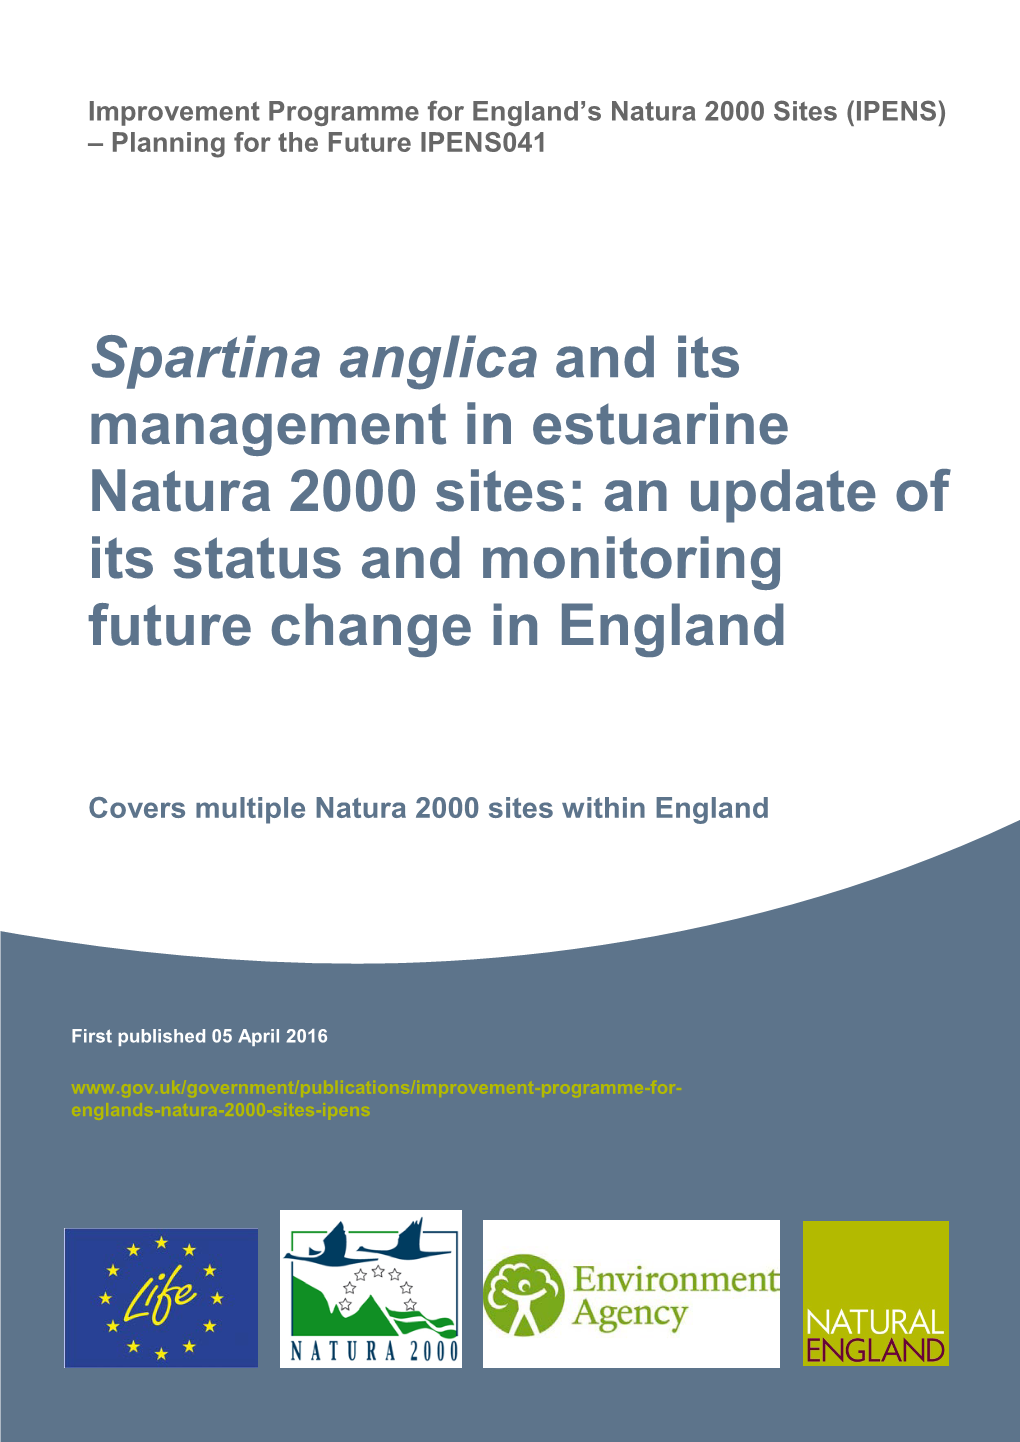 Spartina Anglica and Its Management in Estuarine Natura 2000 Sites: an Update of Its Status and Monitoring Future Change in England